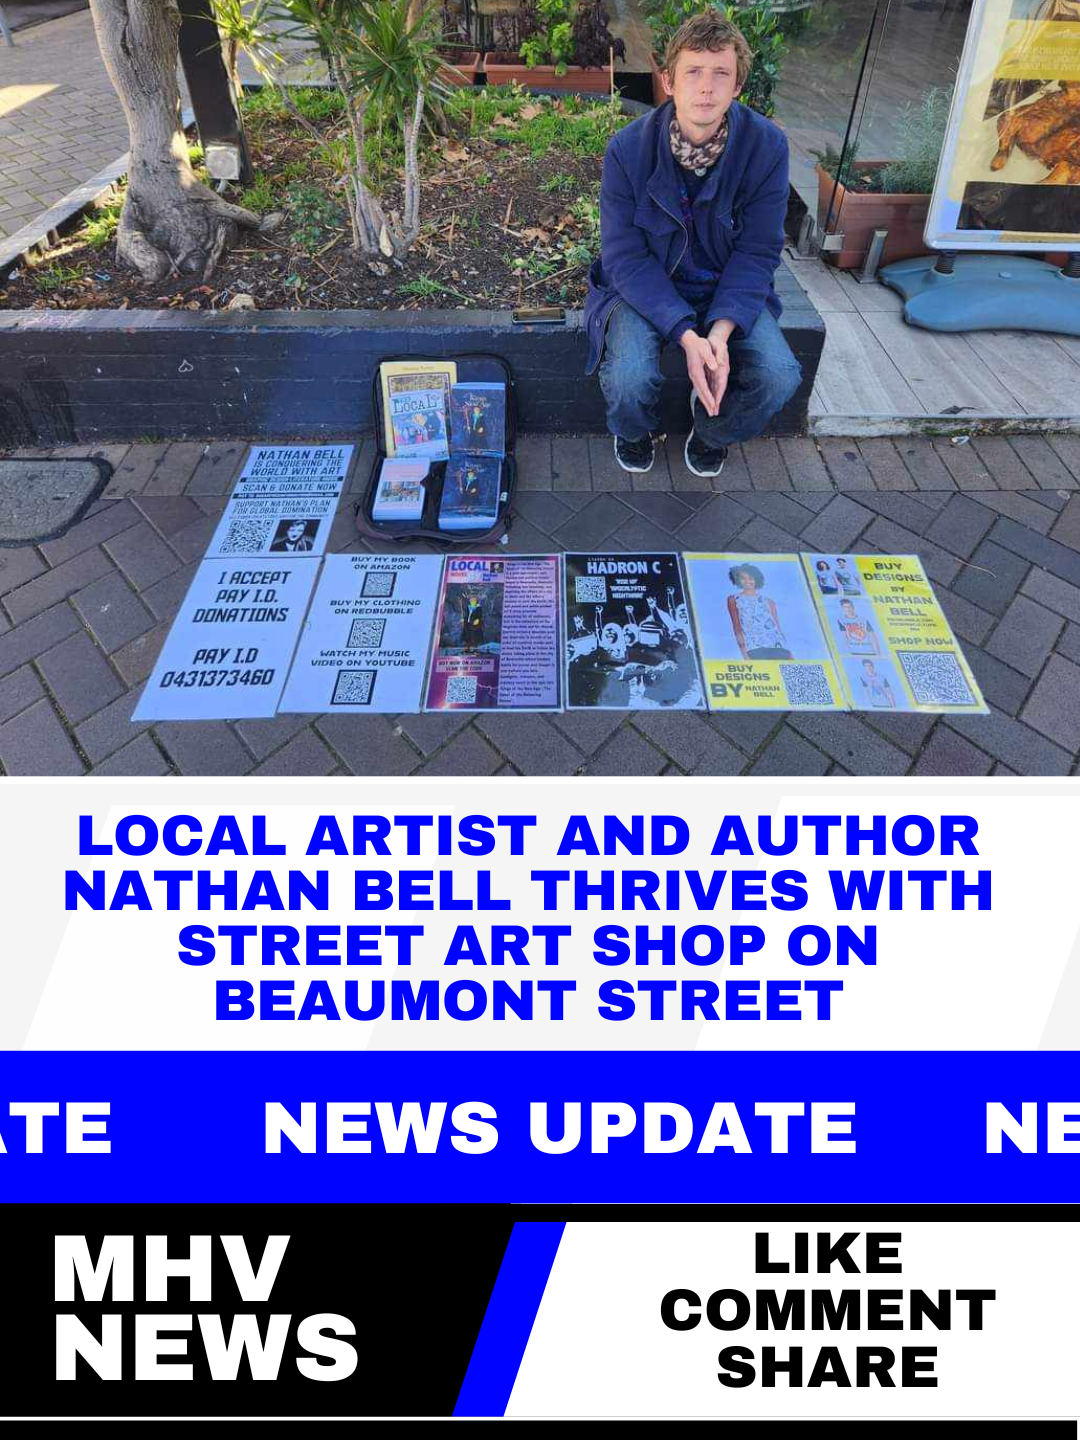 Local Artist and Author Nathan Bell Thrives with Street Art Shop on Beaumont Street